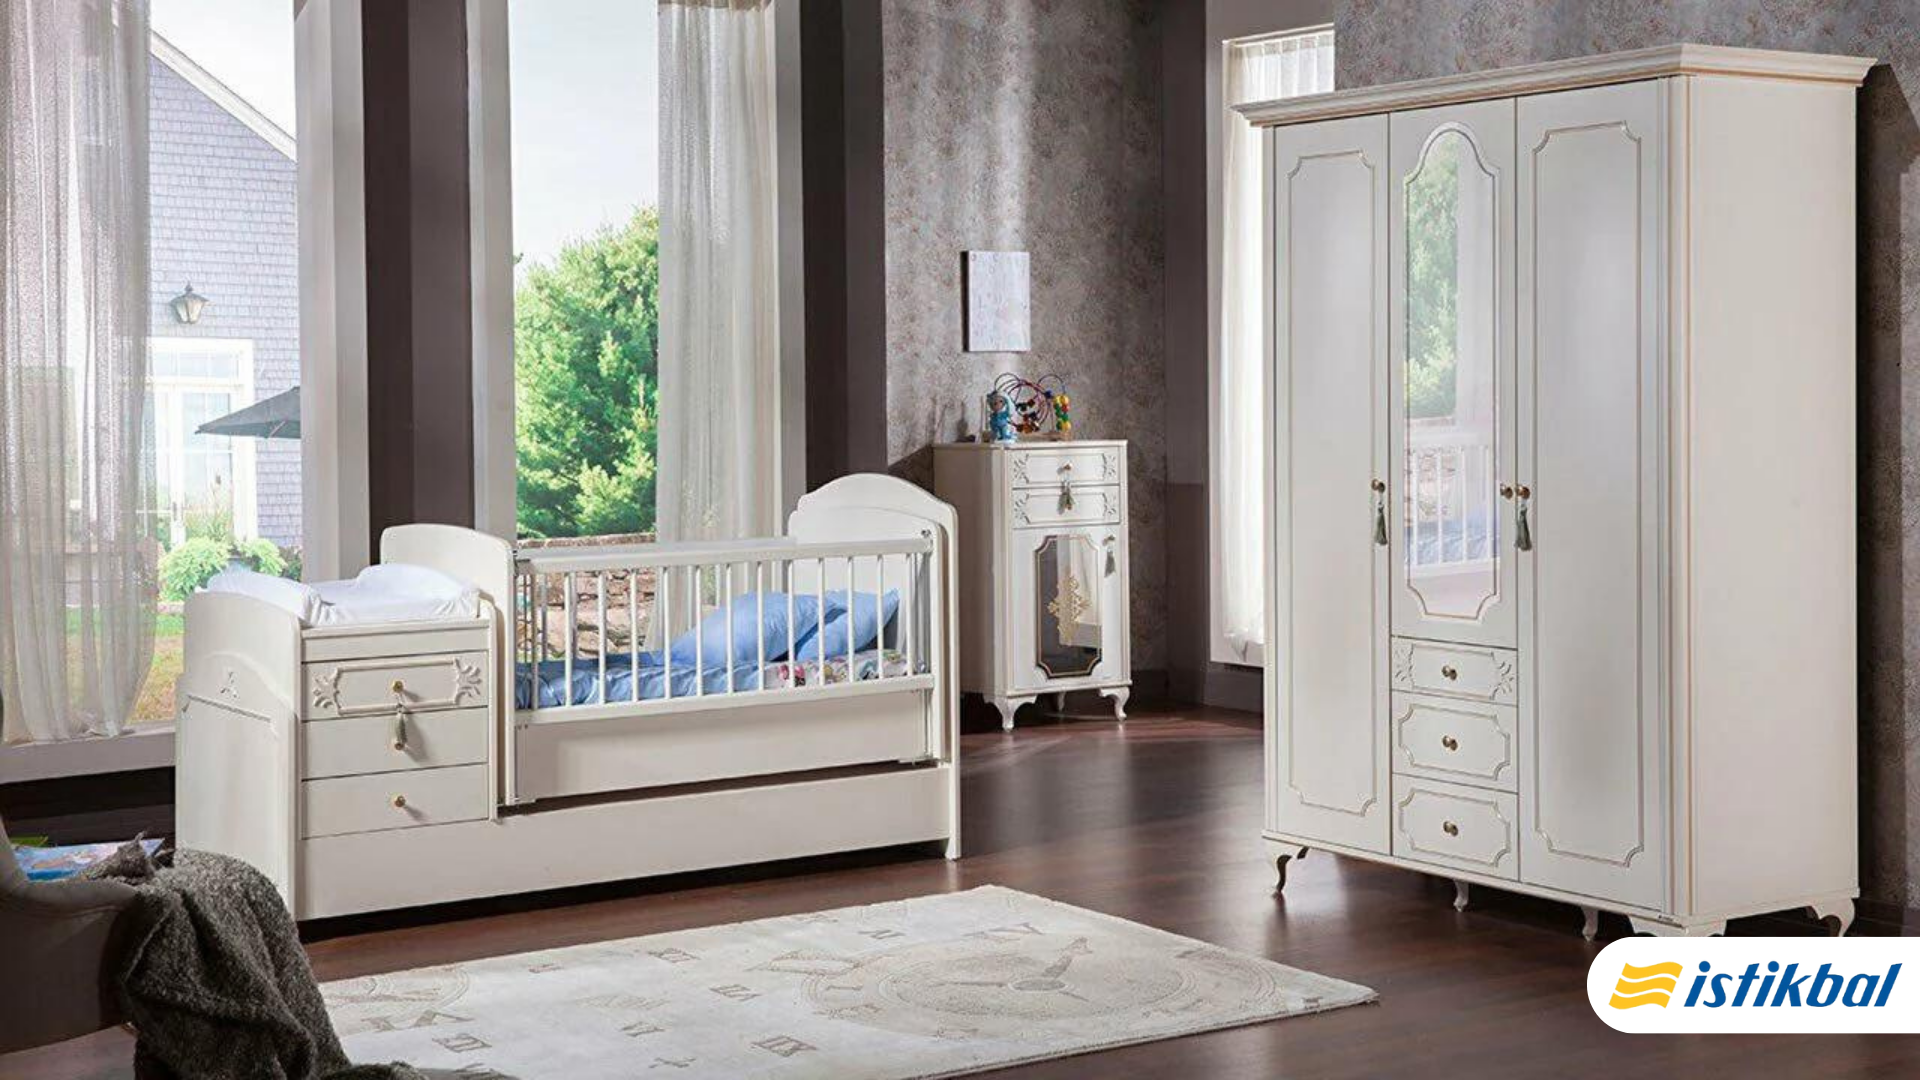 Create a Haven with Istikbal UK’s Baby Room Sets